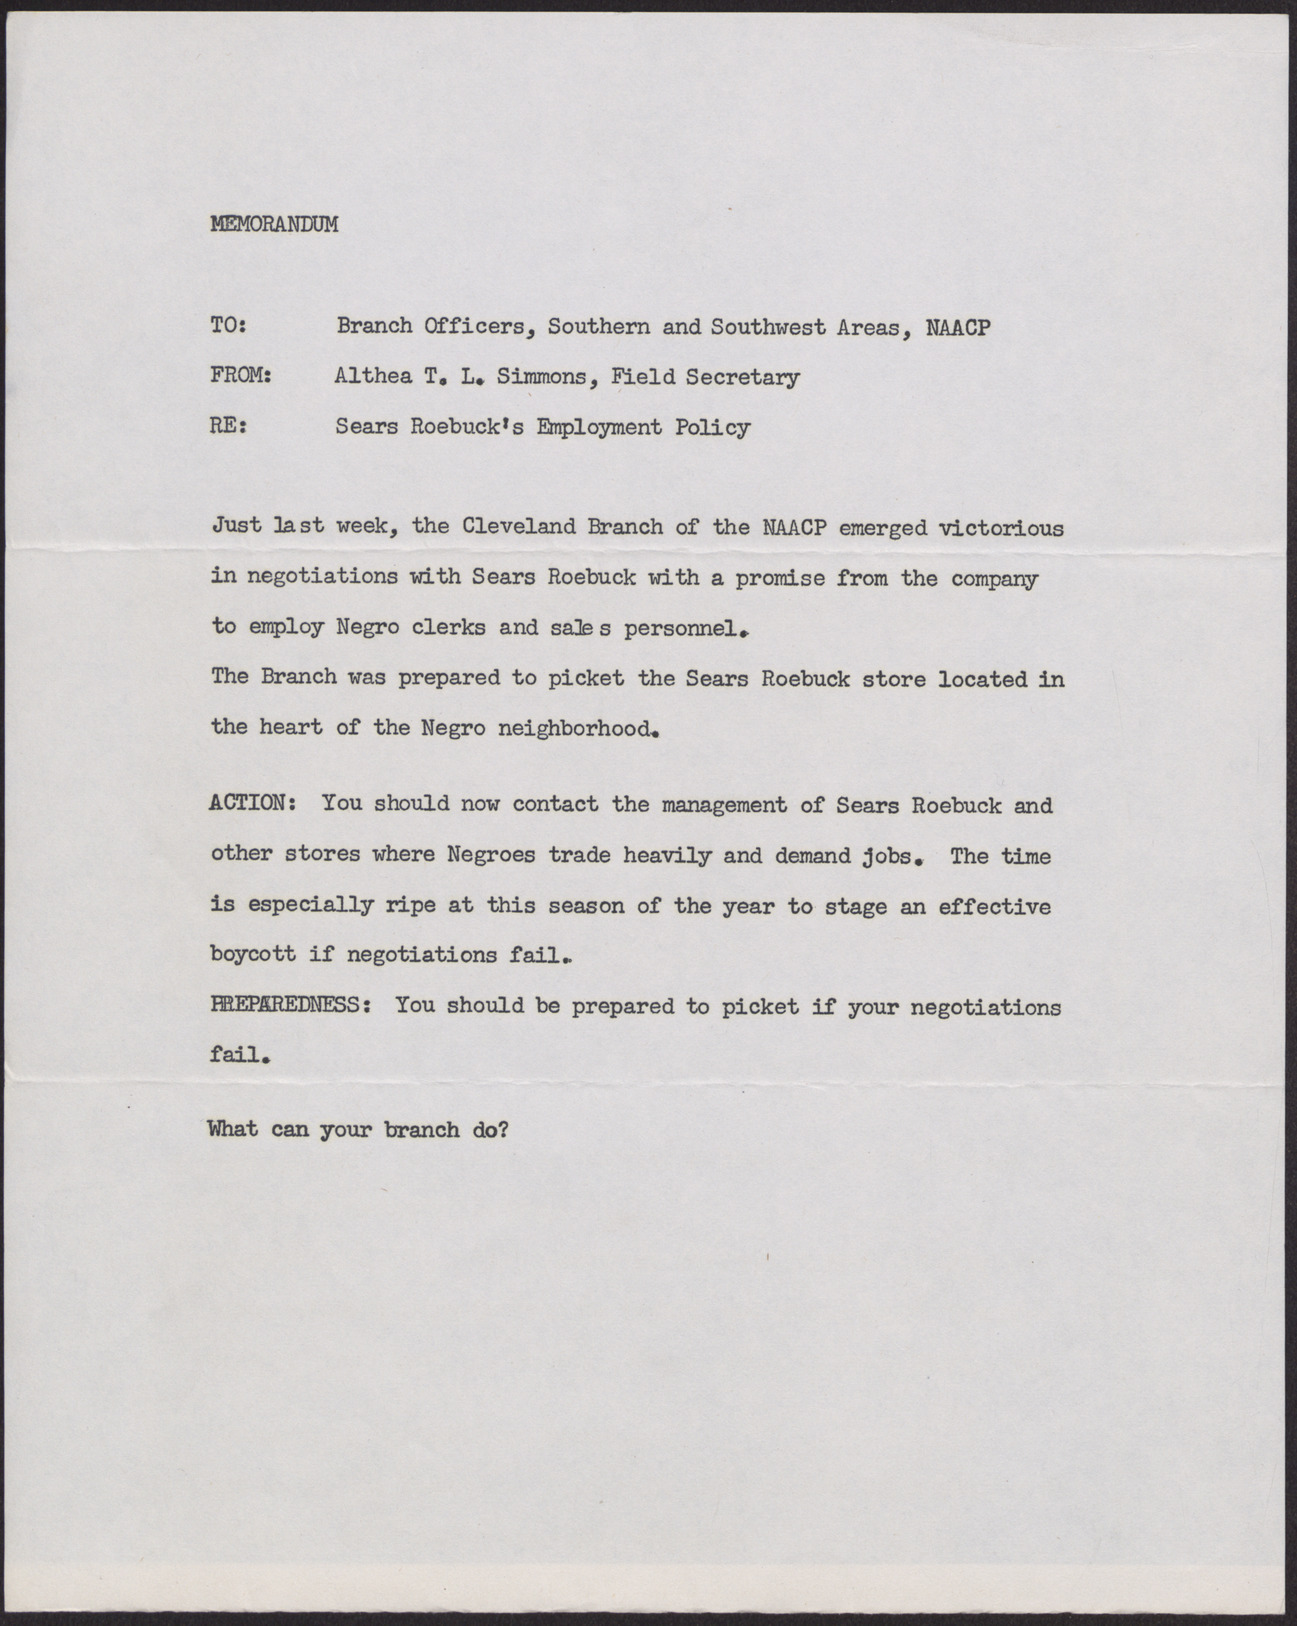 Memorandum to NAACP Branch Officers, Southern and Southwest Areas from Althea T. L. Simmons, no date given